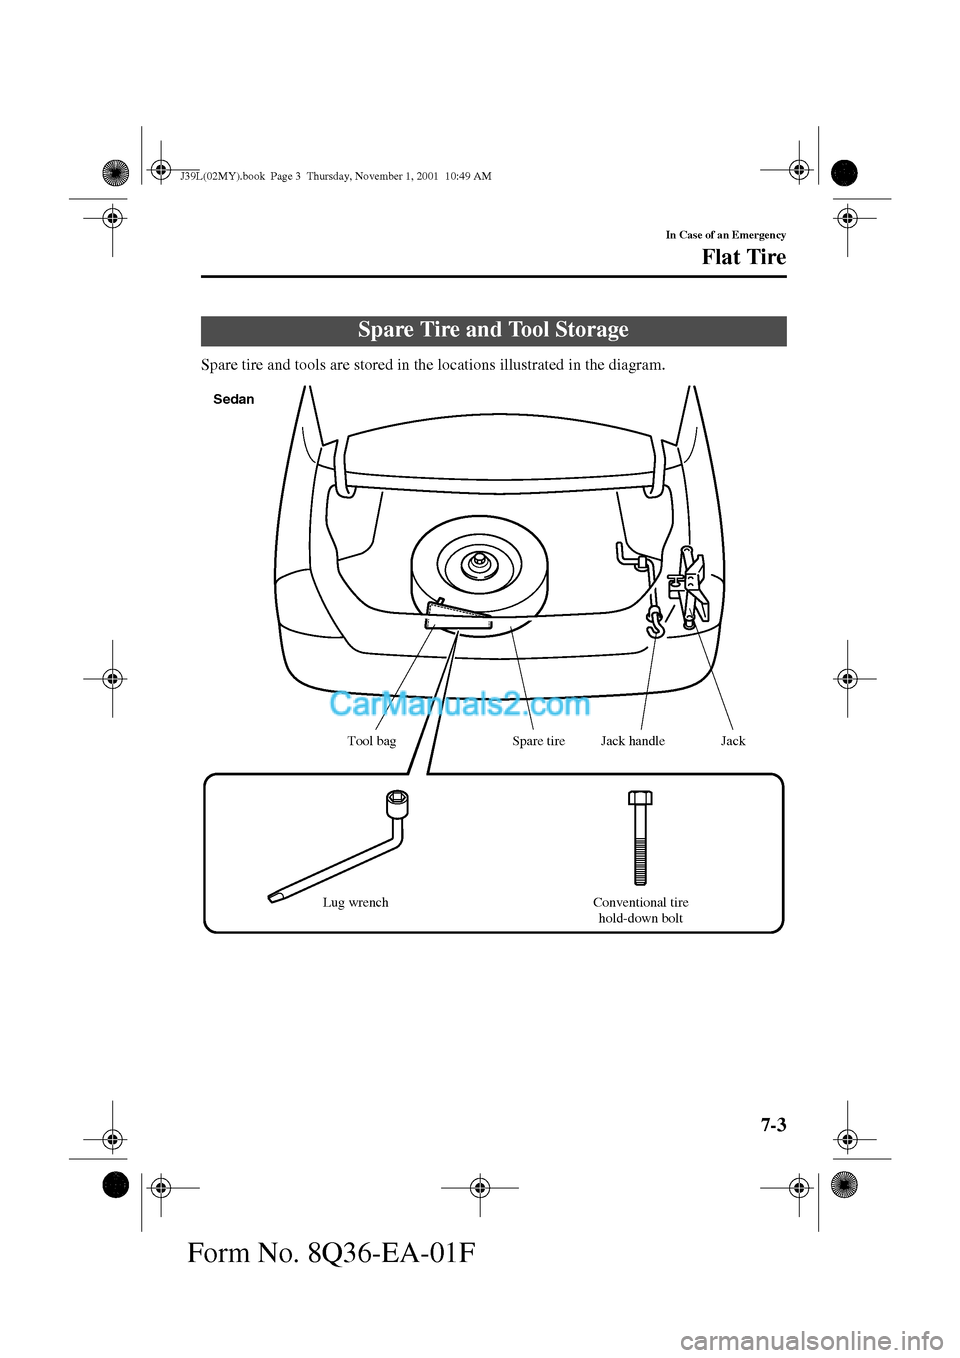 MAZDA MODEL PROTÉGÉ 2002  Owners Manual (in English) 7-3
In Case of an Emergency
Form No. 8Q36-EA-01F
Flat Tire
Spare tire and tools are stored in the locations illustrated in the diagram.
Spare Tire and Tool Storage
Jack handle
Lug wrench Conventional 